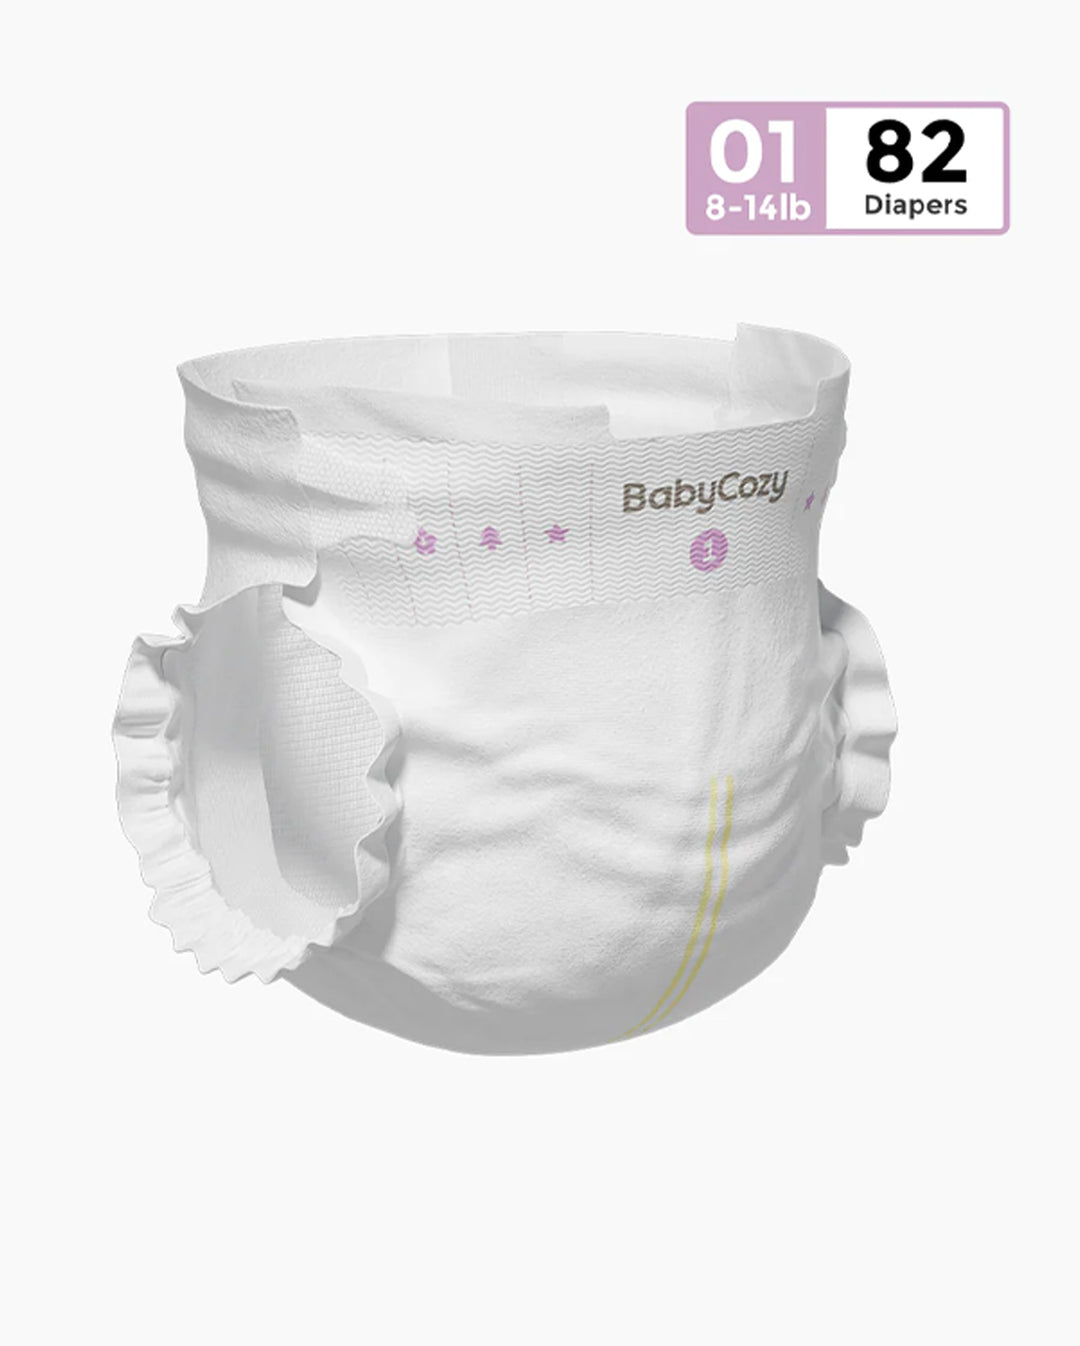 Babycozy ,Overnight, Disposable Diapers Size1,2 & 3 For Kids & Babies